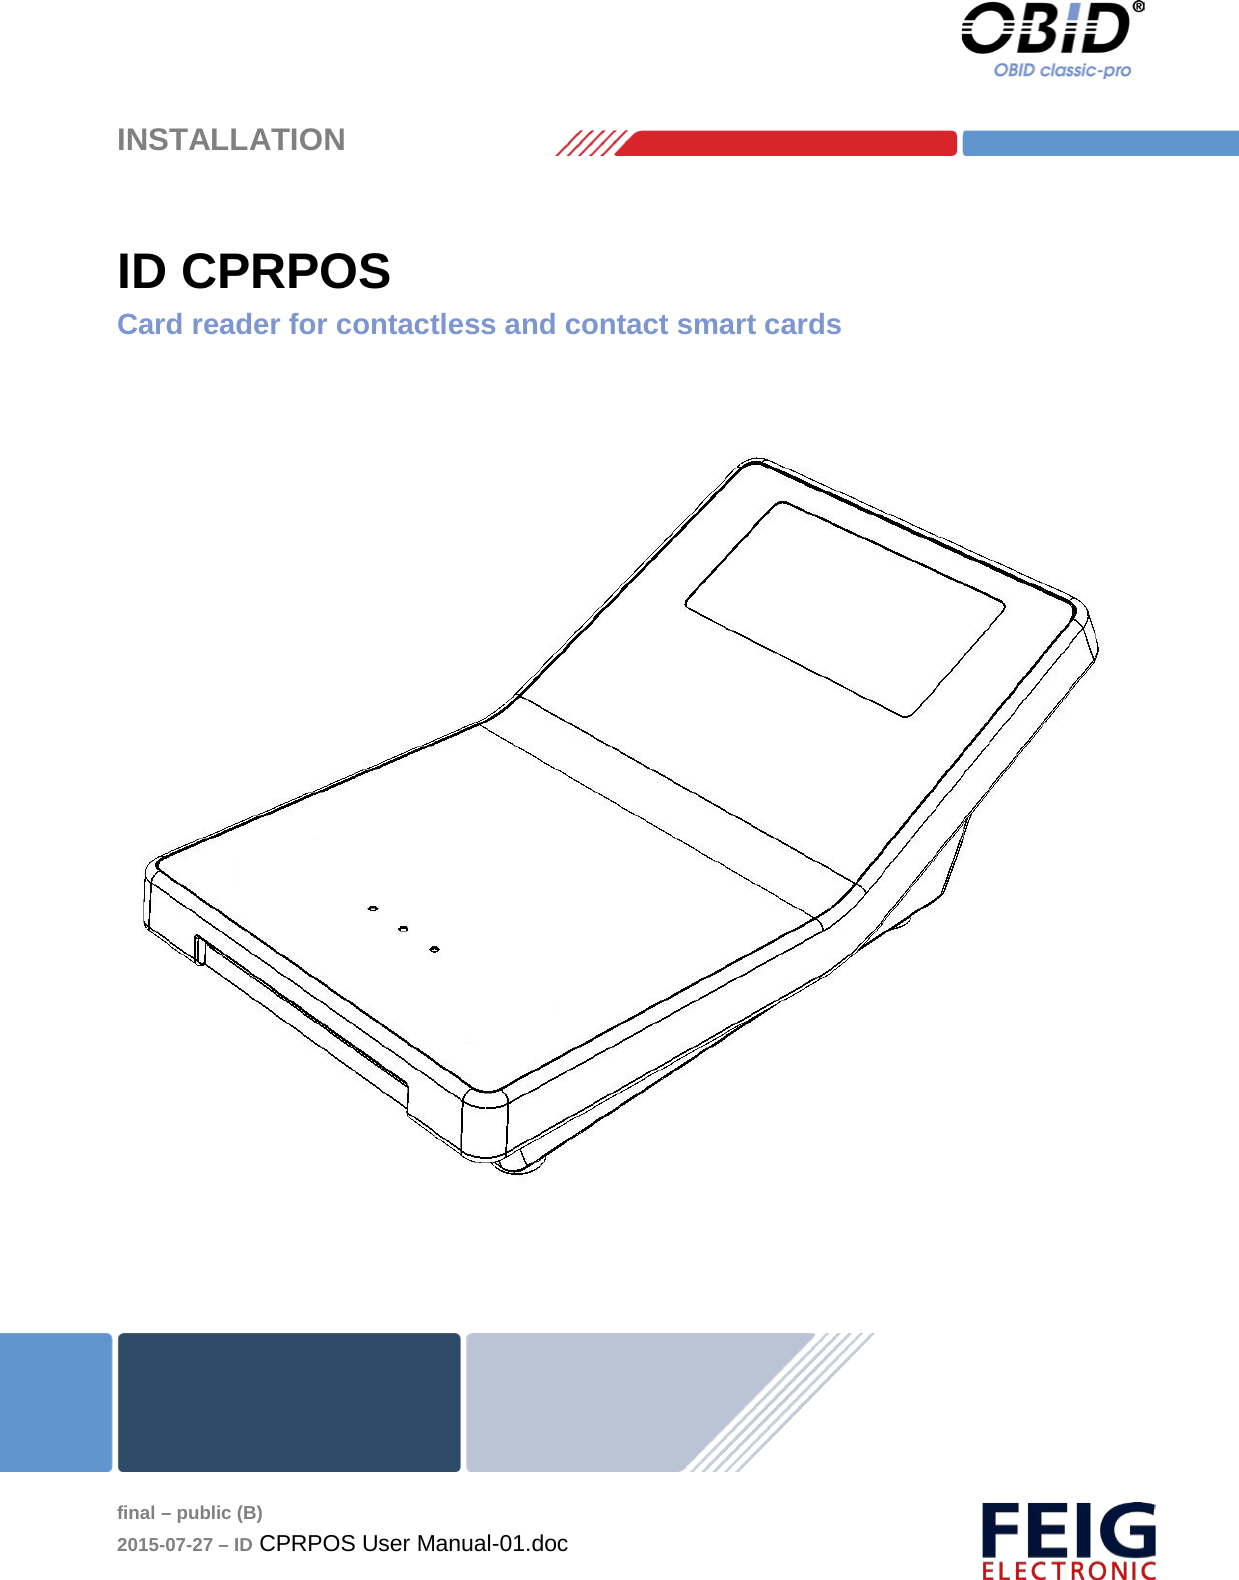    INSTALLATION     final – public (B) 2015-07-27 – ID CPRPOS User Manual-01.doc  ID CPRPOS Card reader for contactless and contact smart cards       